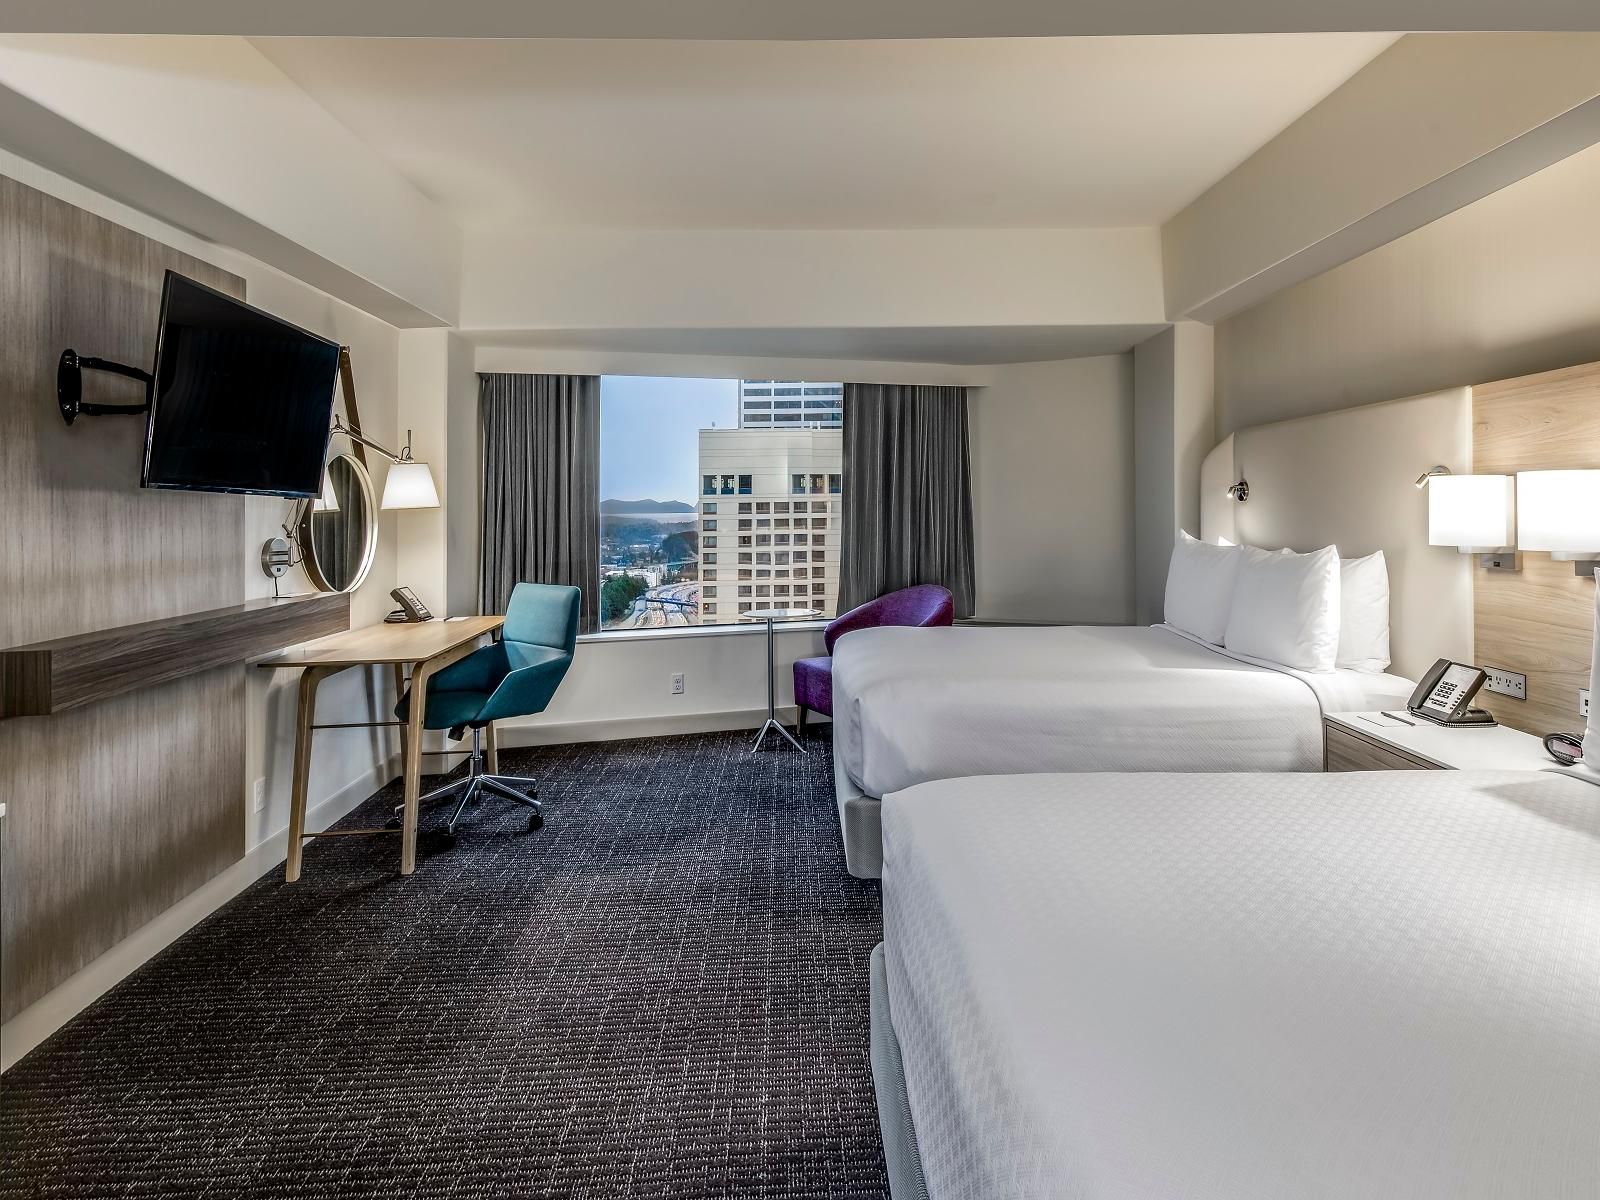 Providing the convenience of being just a 7-minute walk from the Washington State Convention Center. Book and stay with us for your next convention!